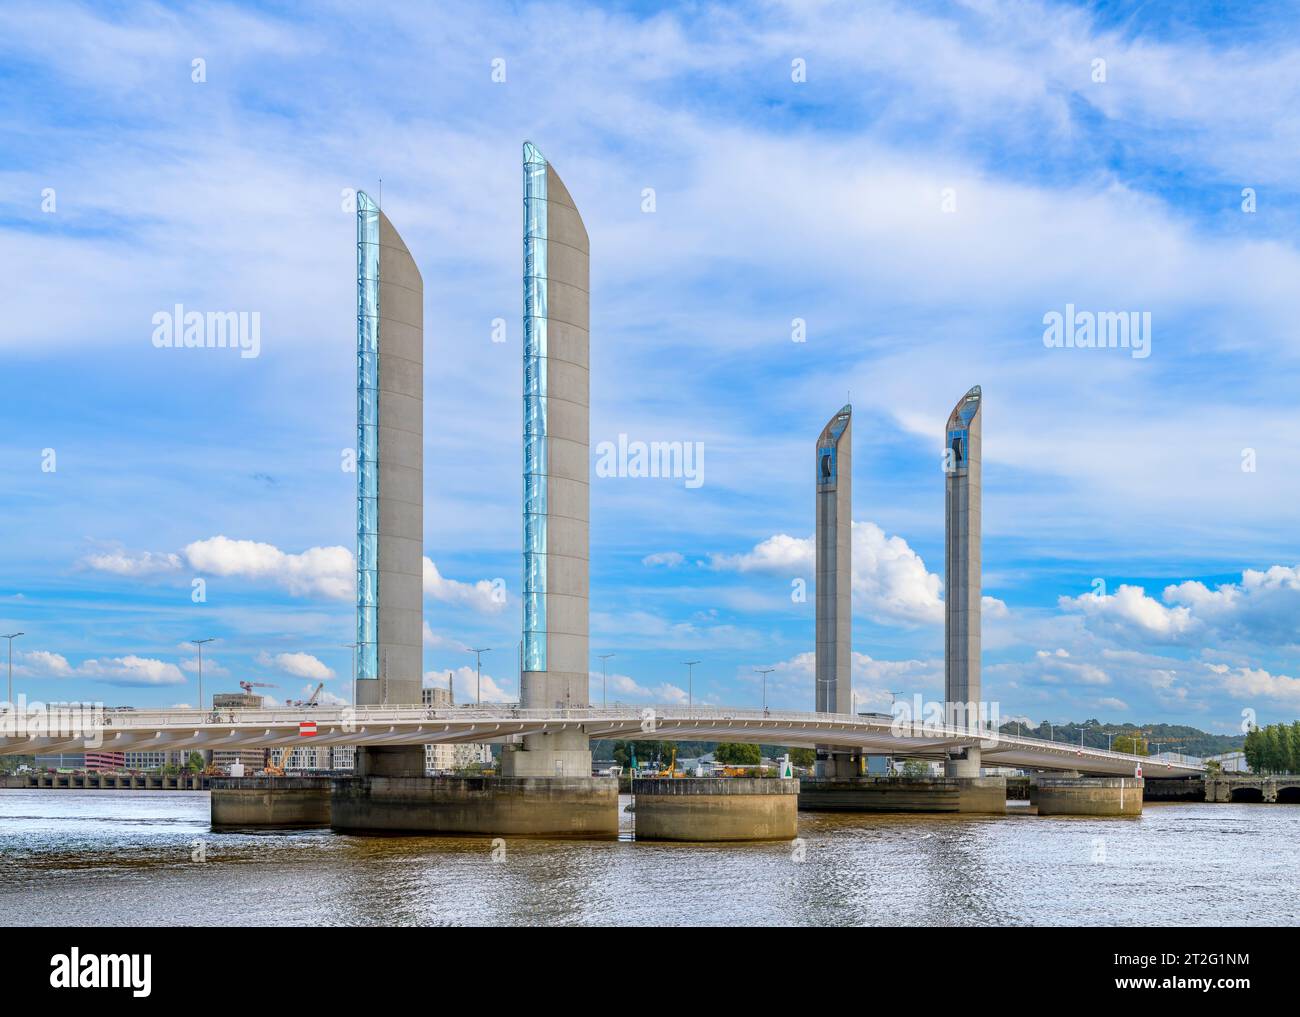 The Pont Jacques Chaban-Delmas bridges the Garonne in Bordeaux. The bridge raises by lowering counter-balance weights on cables to allow ships under. Stock Photo